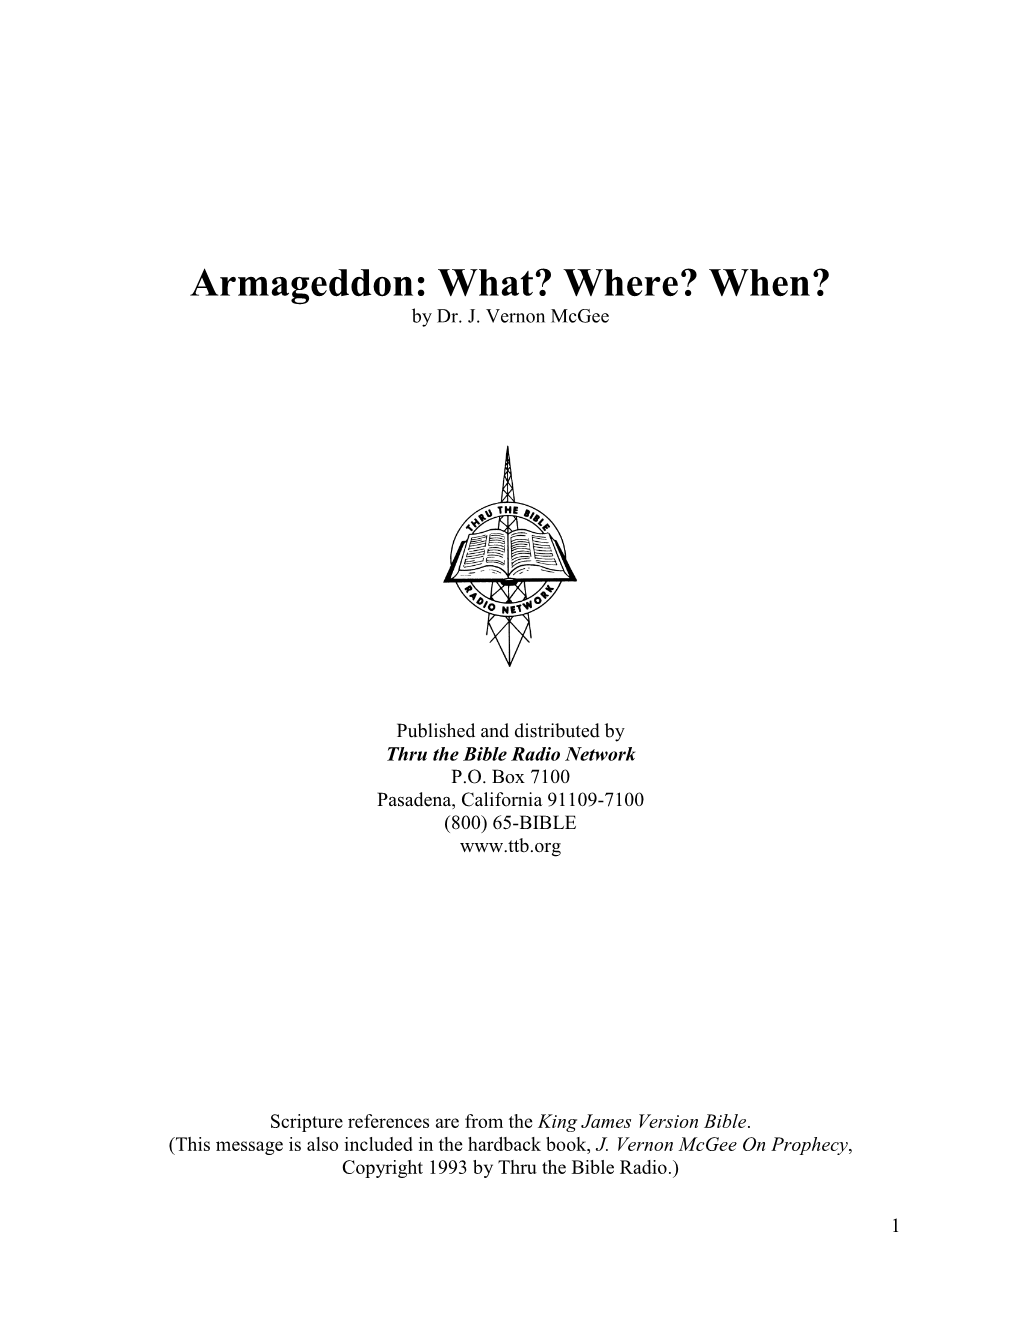 Armageddon: What? Where? When? by Dr